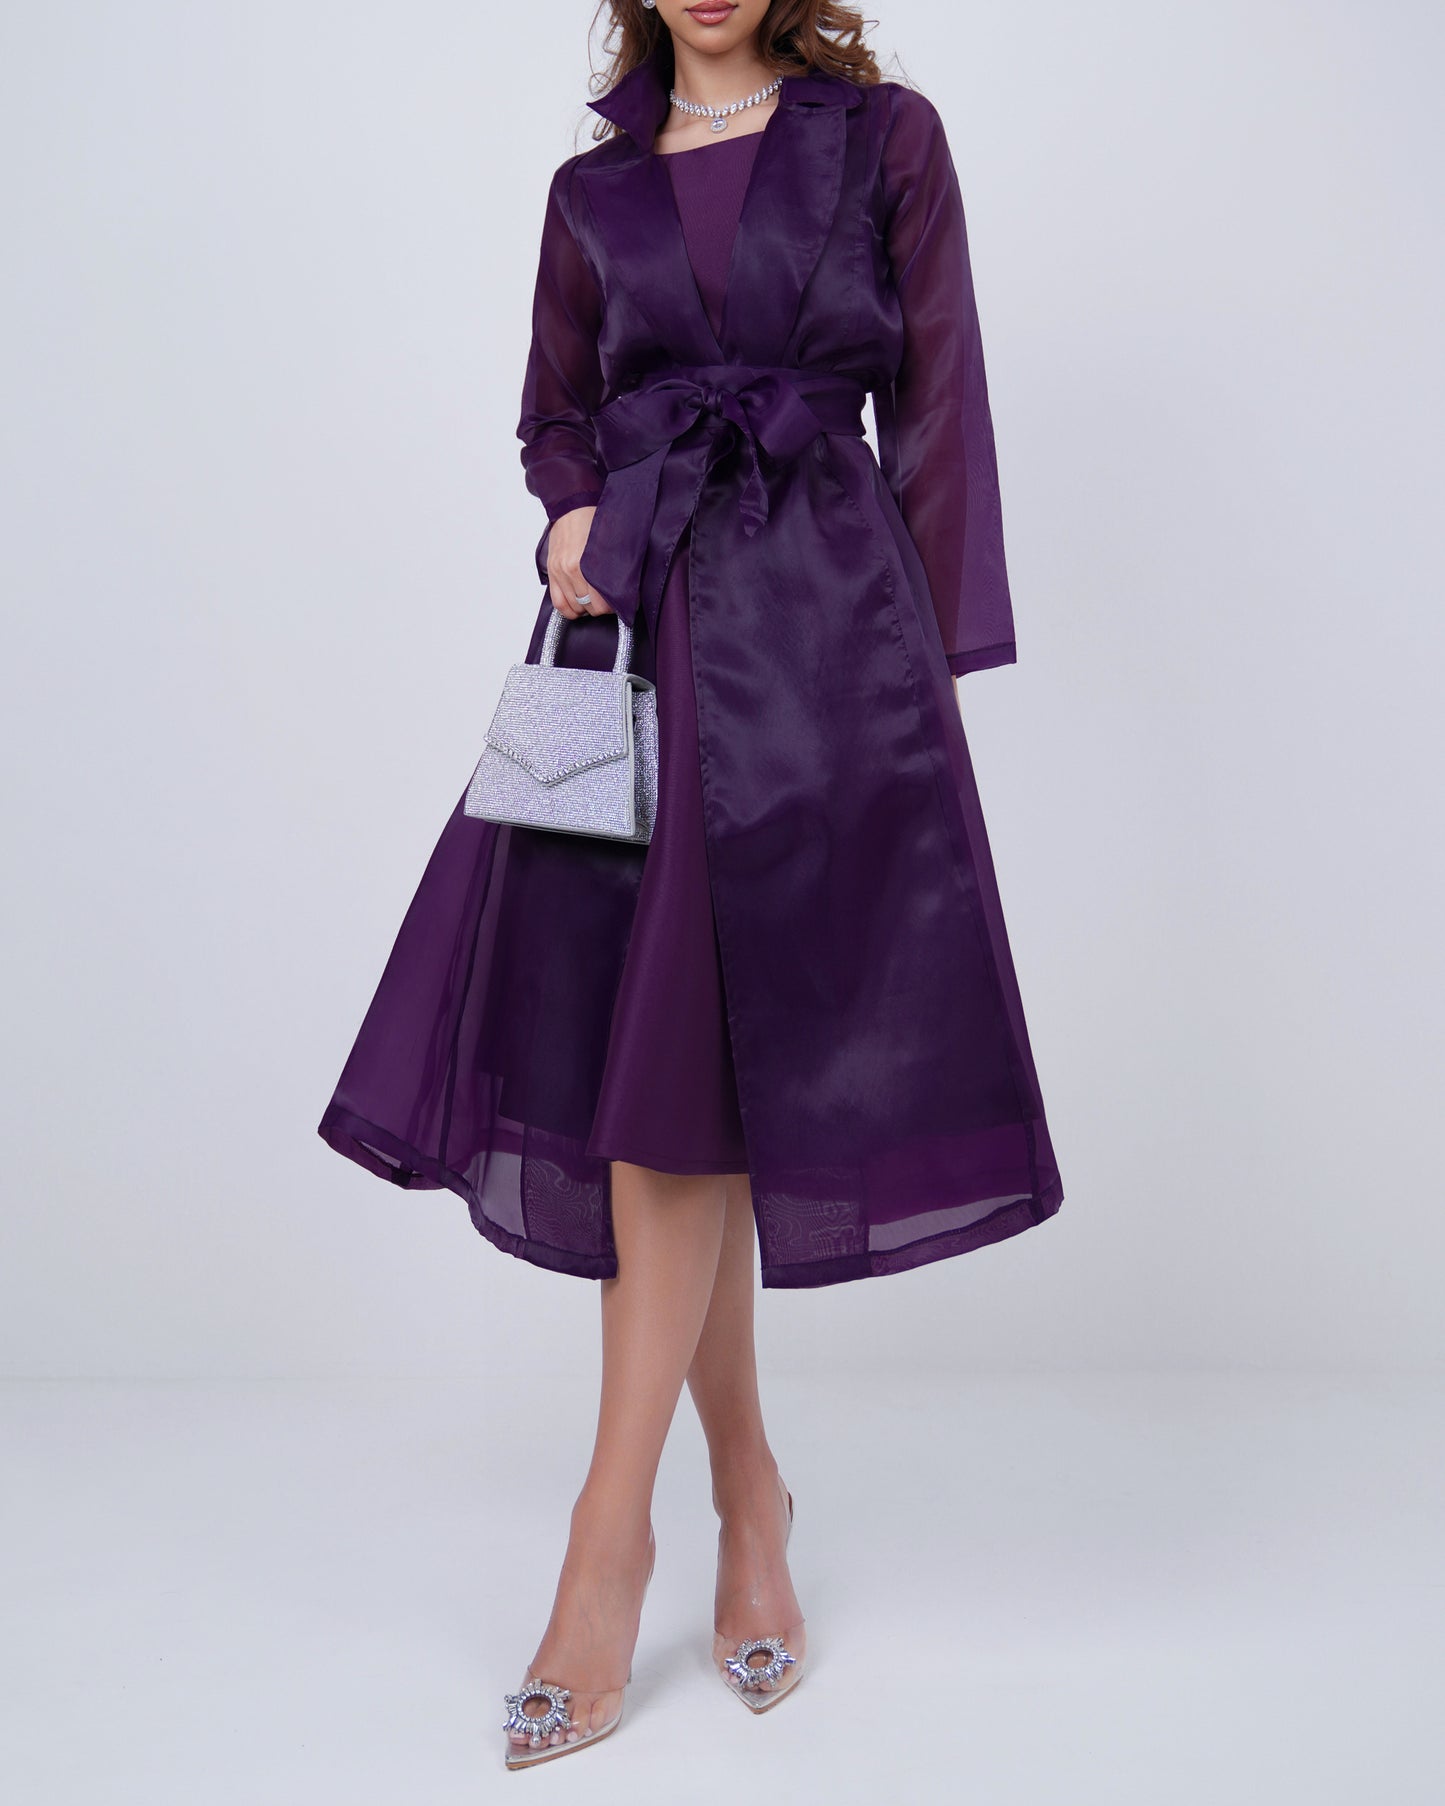 Satin dress toped with organza belted jacket in royal regalia